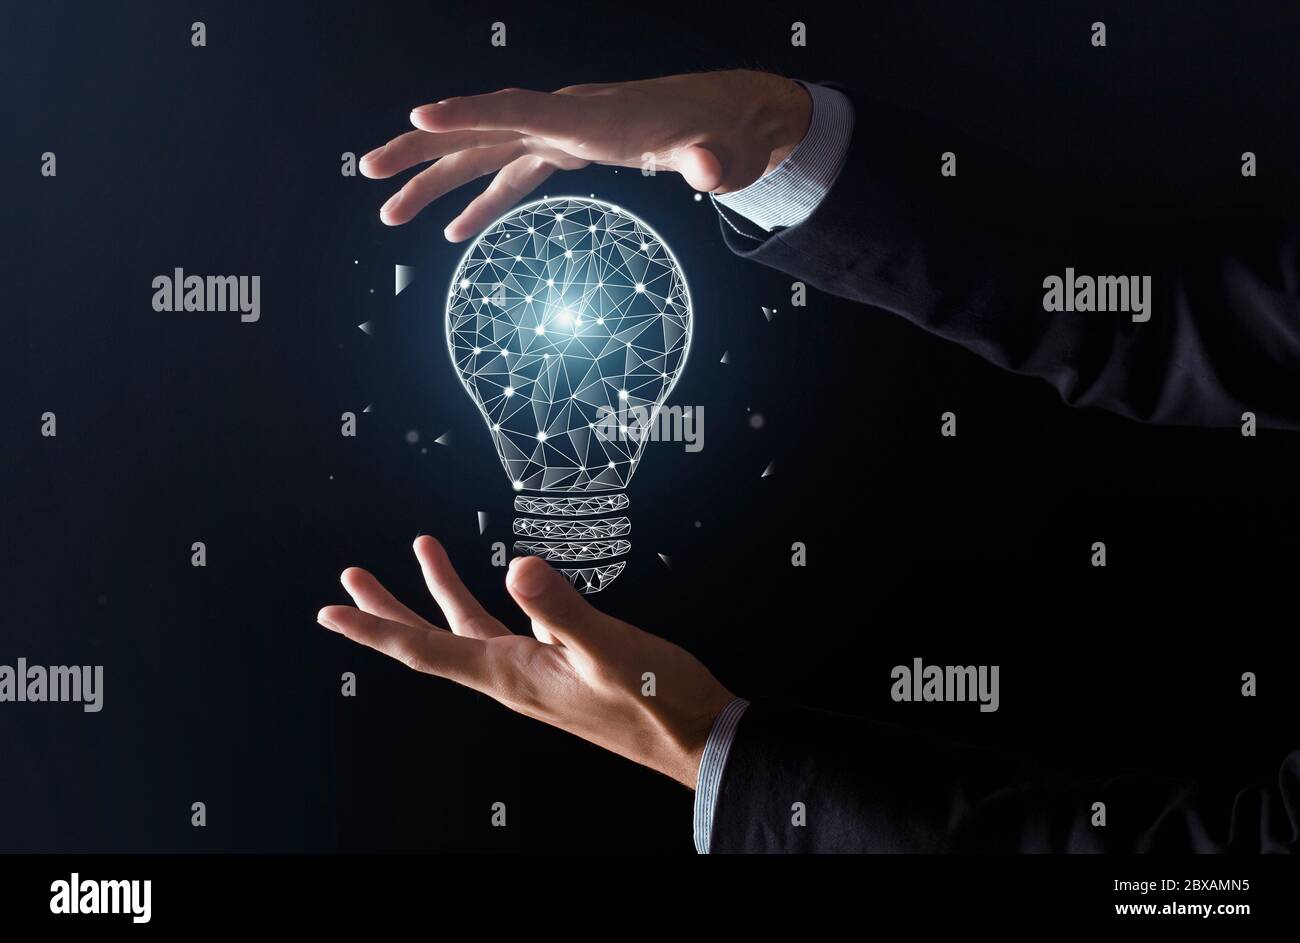 New ideas with innovation and creativity. Man hands do trick and glowing abstract light bulb appears Stock Photo